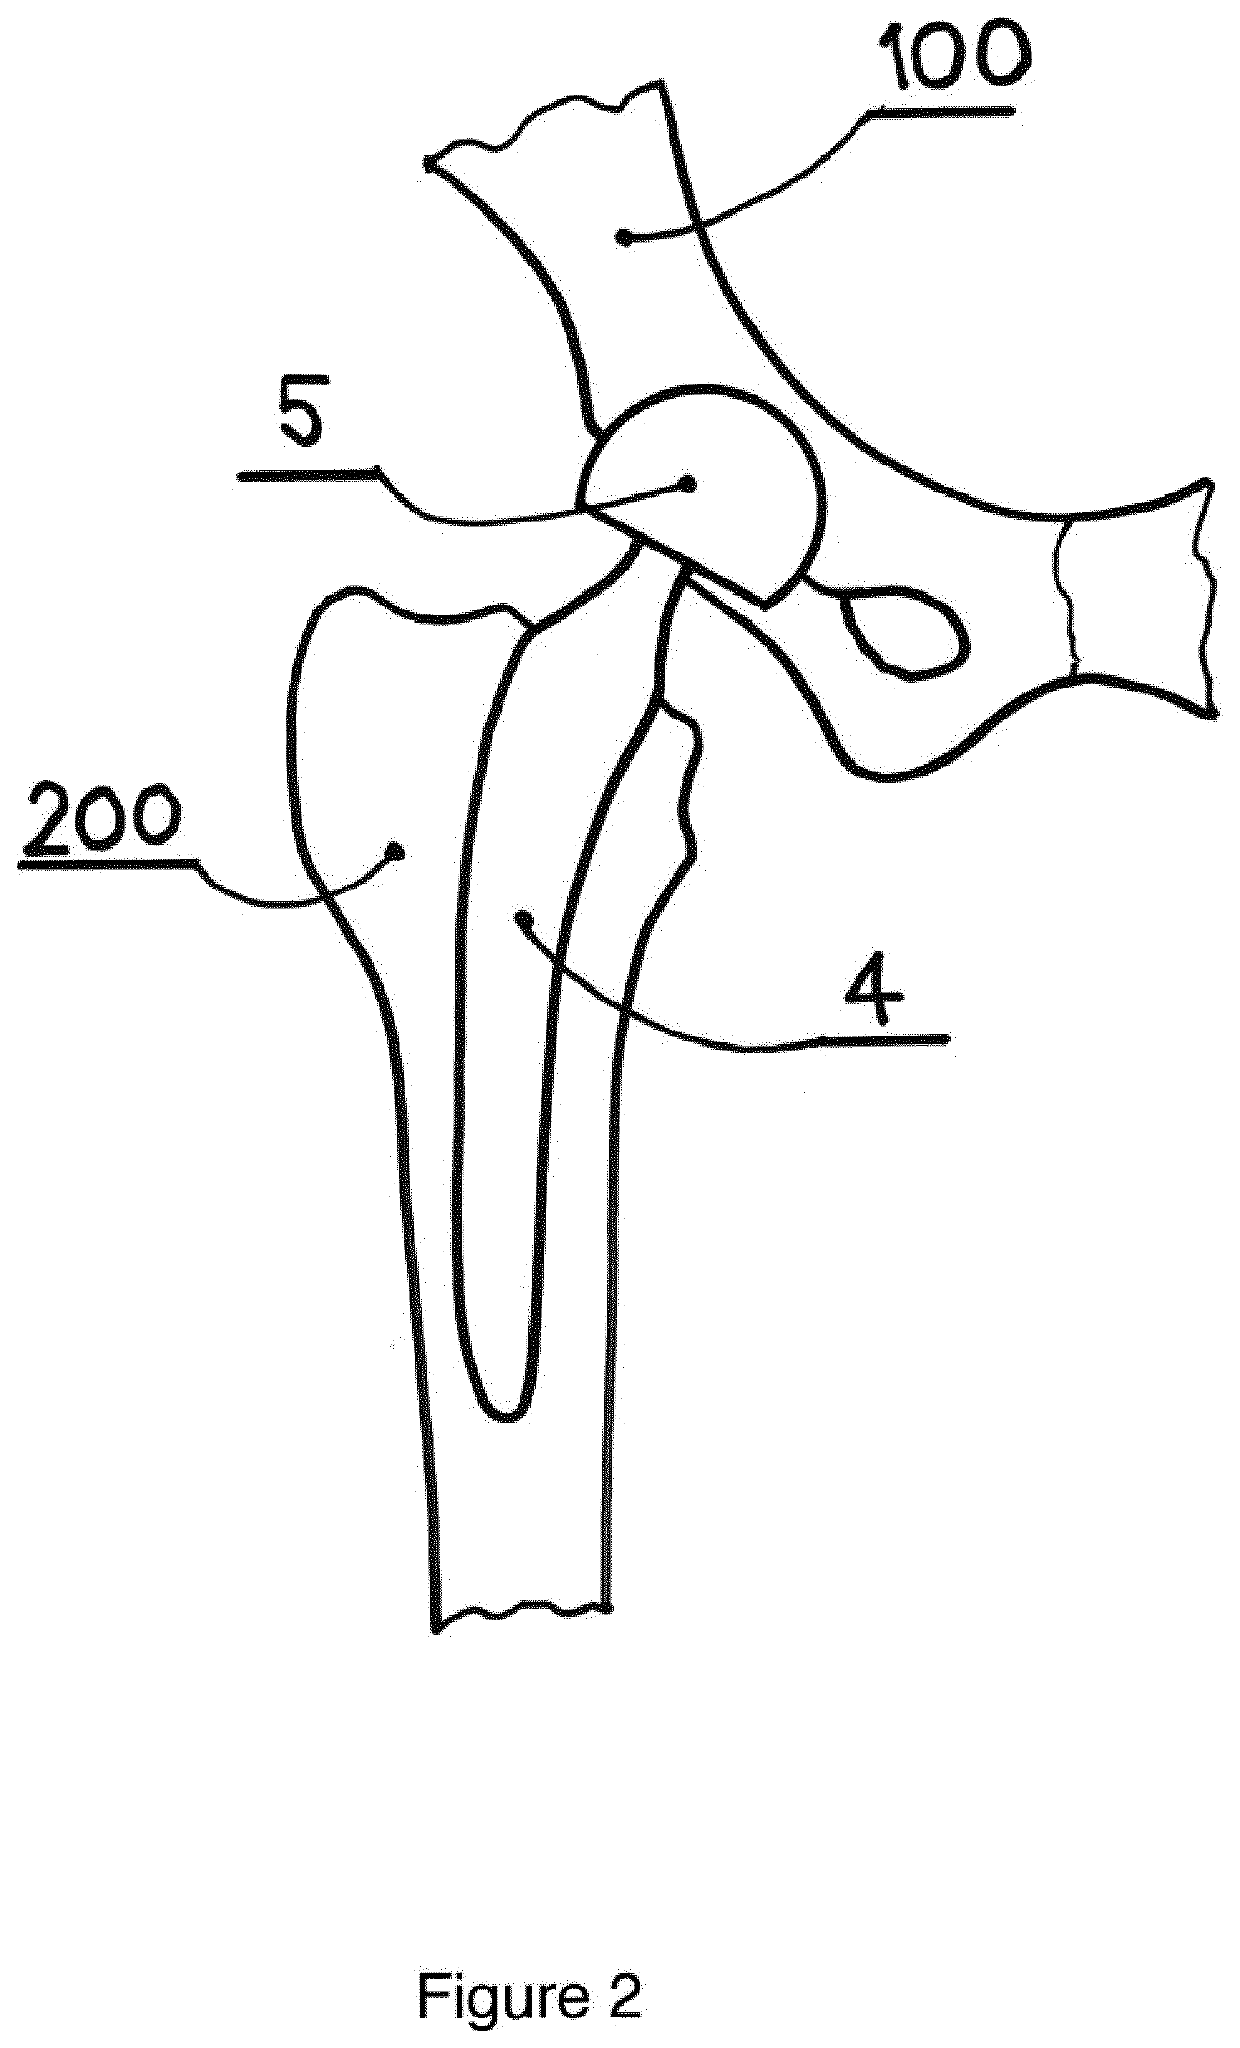 Resurfacing  cup for acetabulum hemiarthroplasty of the hip joint